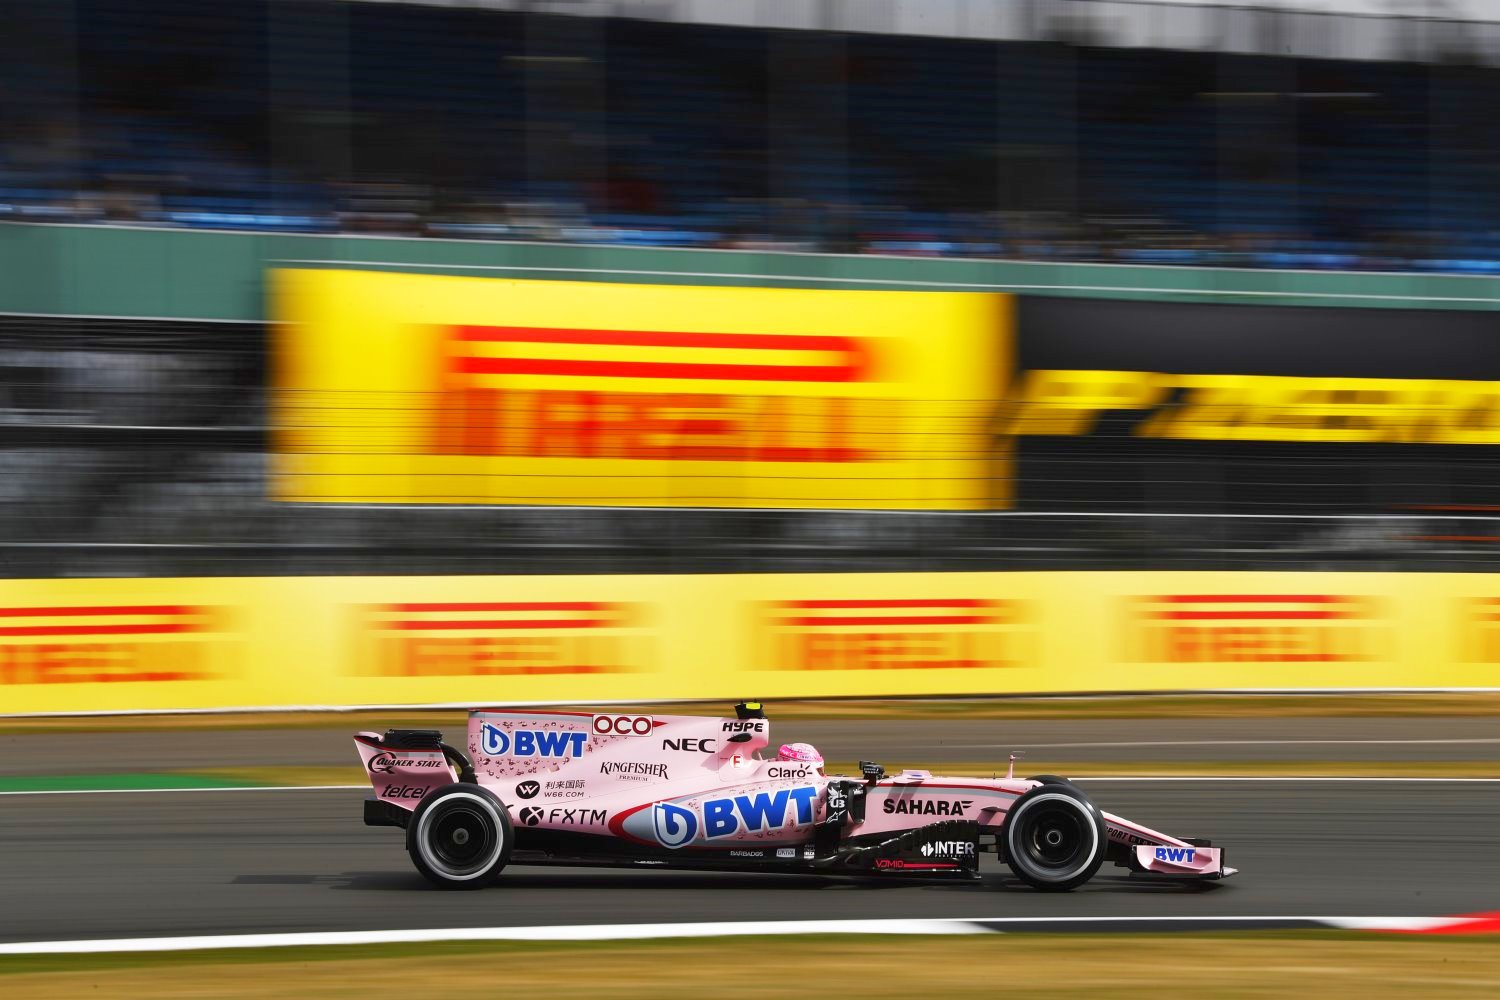 Ocon in the pink Force India